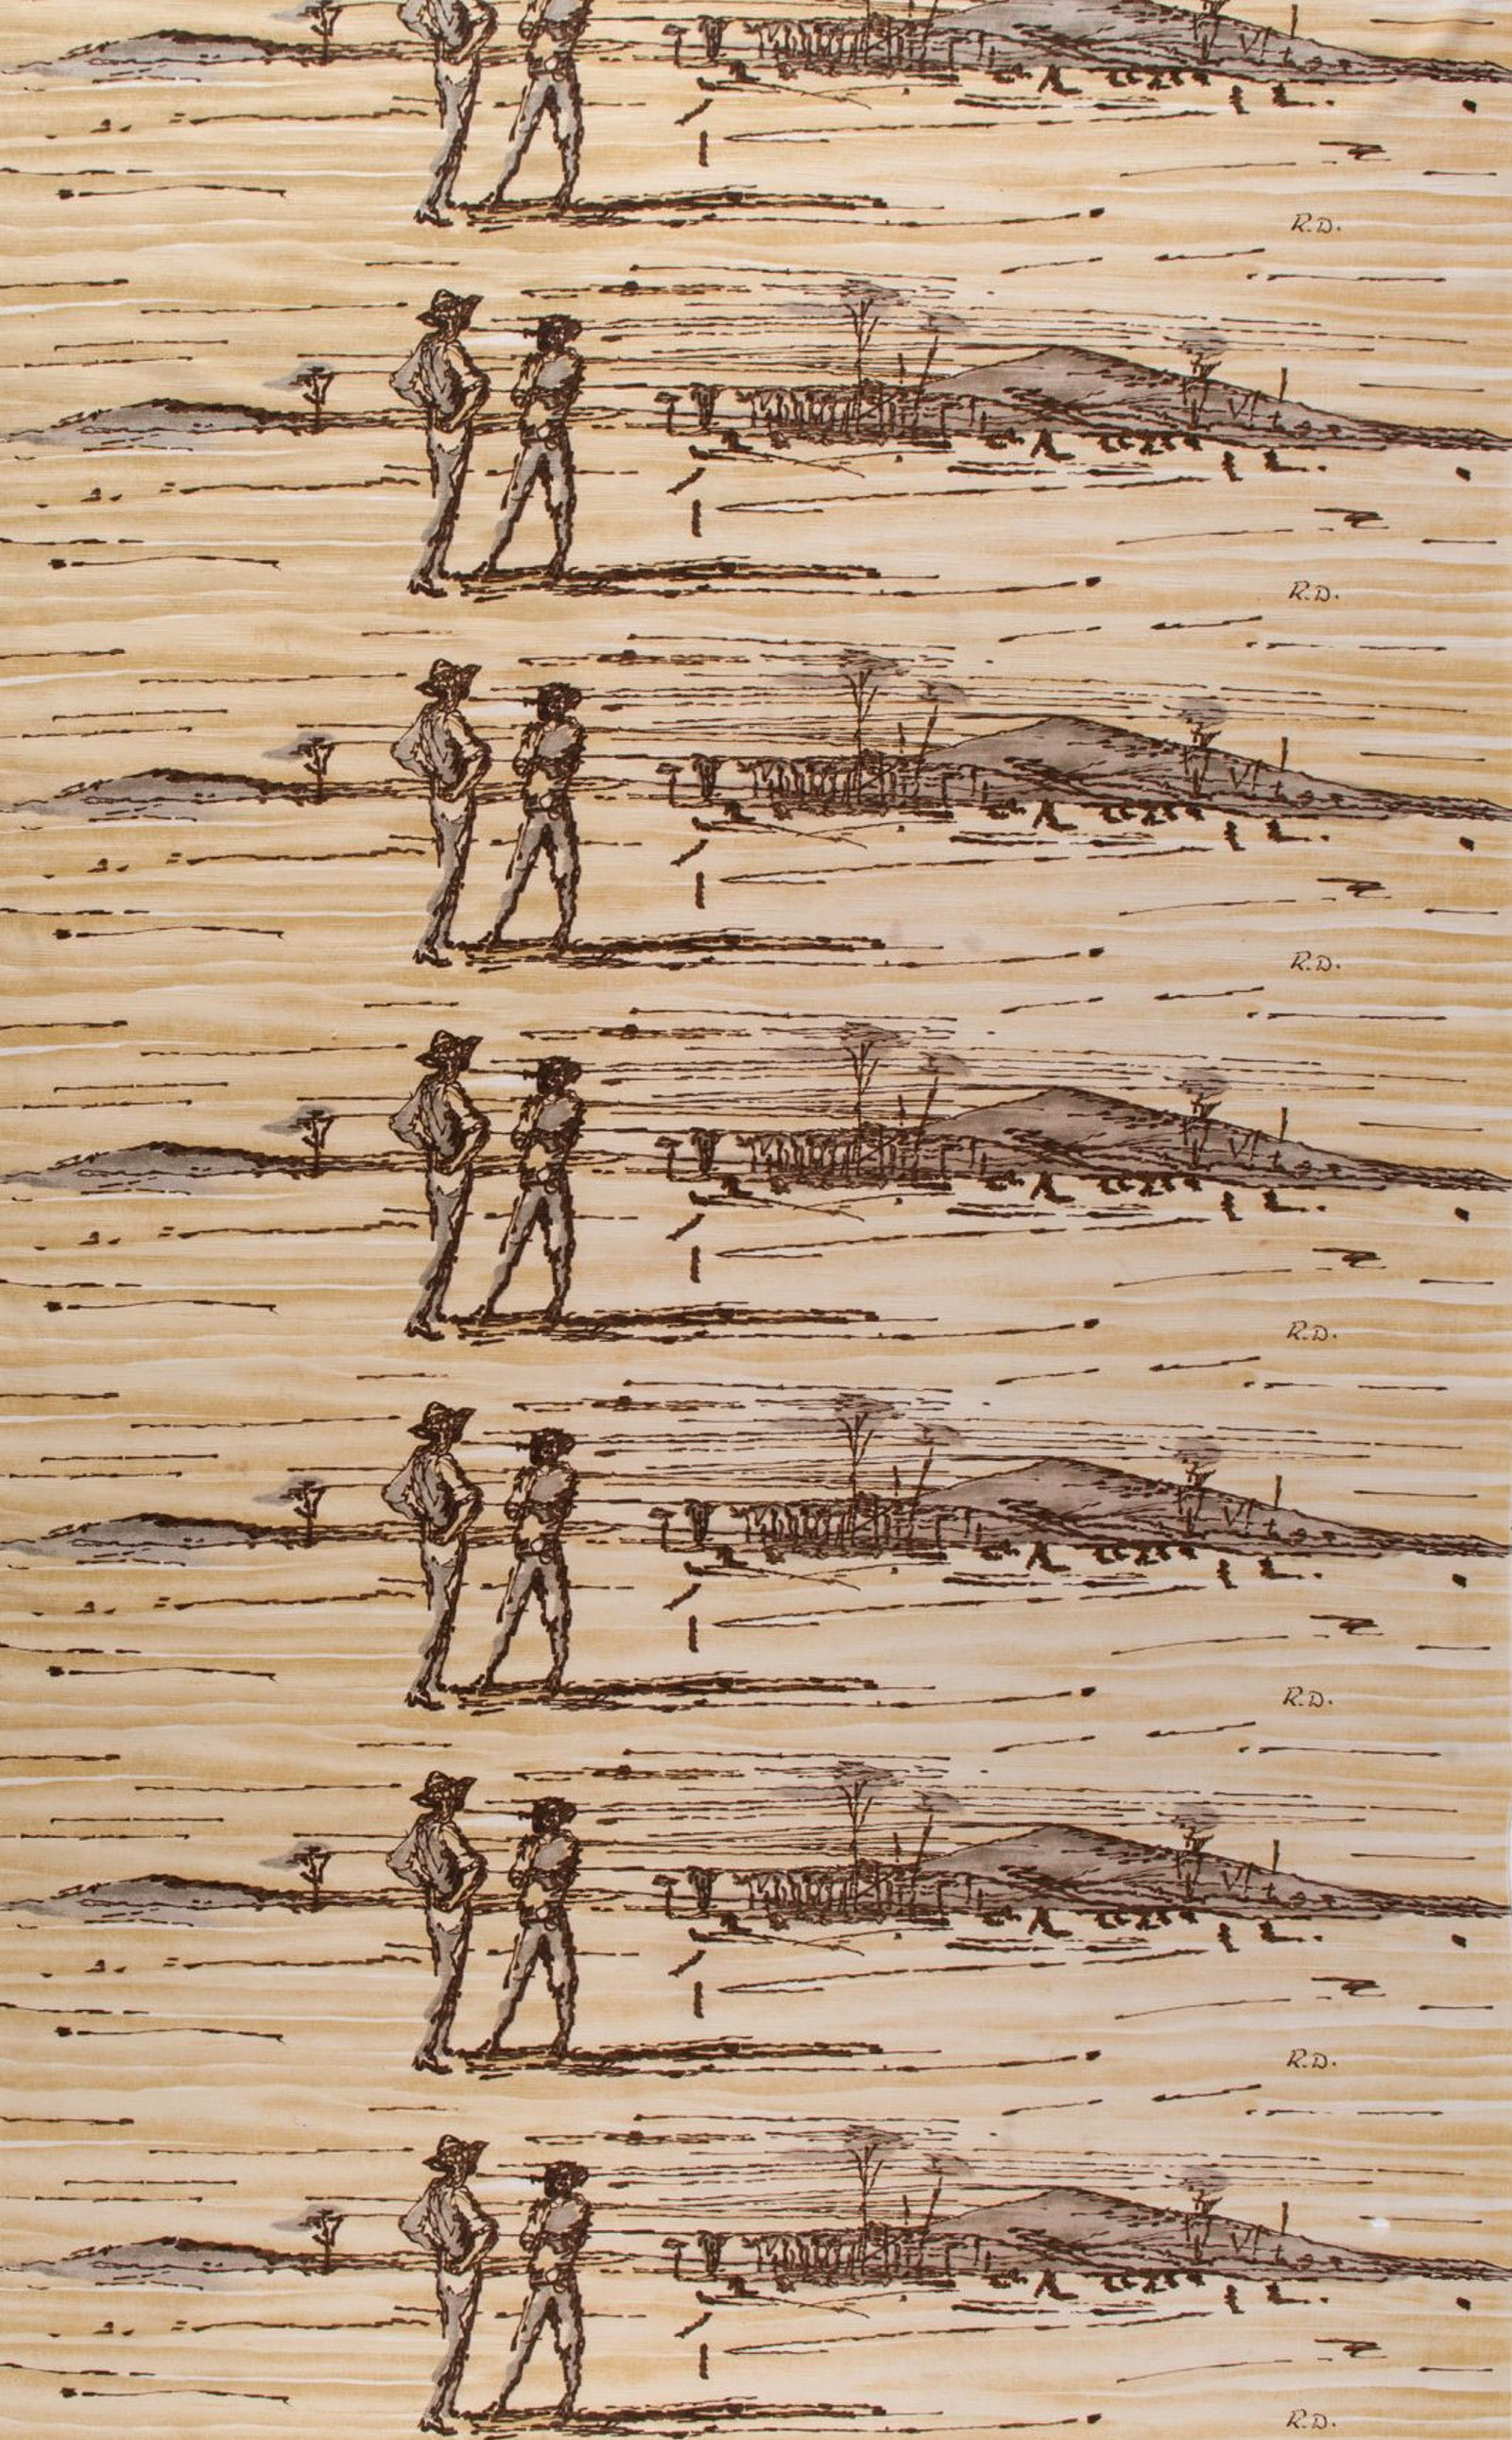 â€˜Figures in landscapeâ€™ design by Russell Drysdale